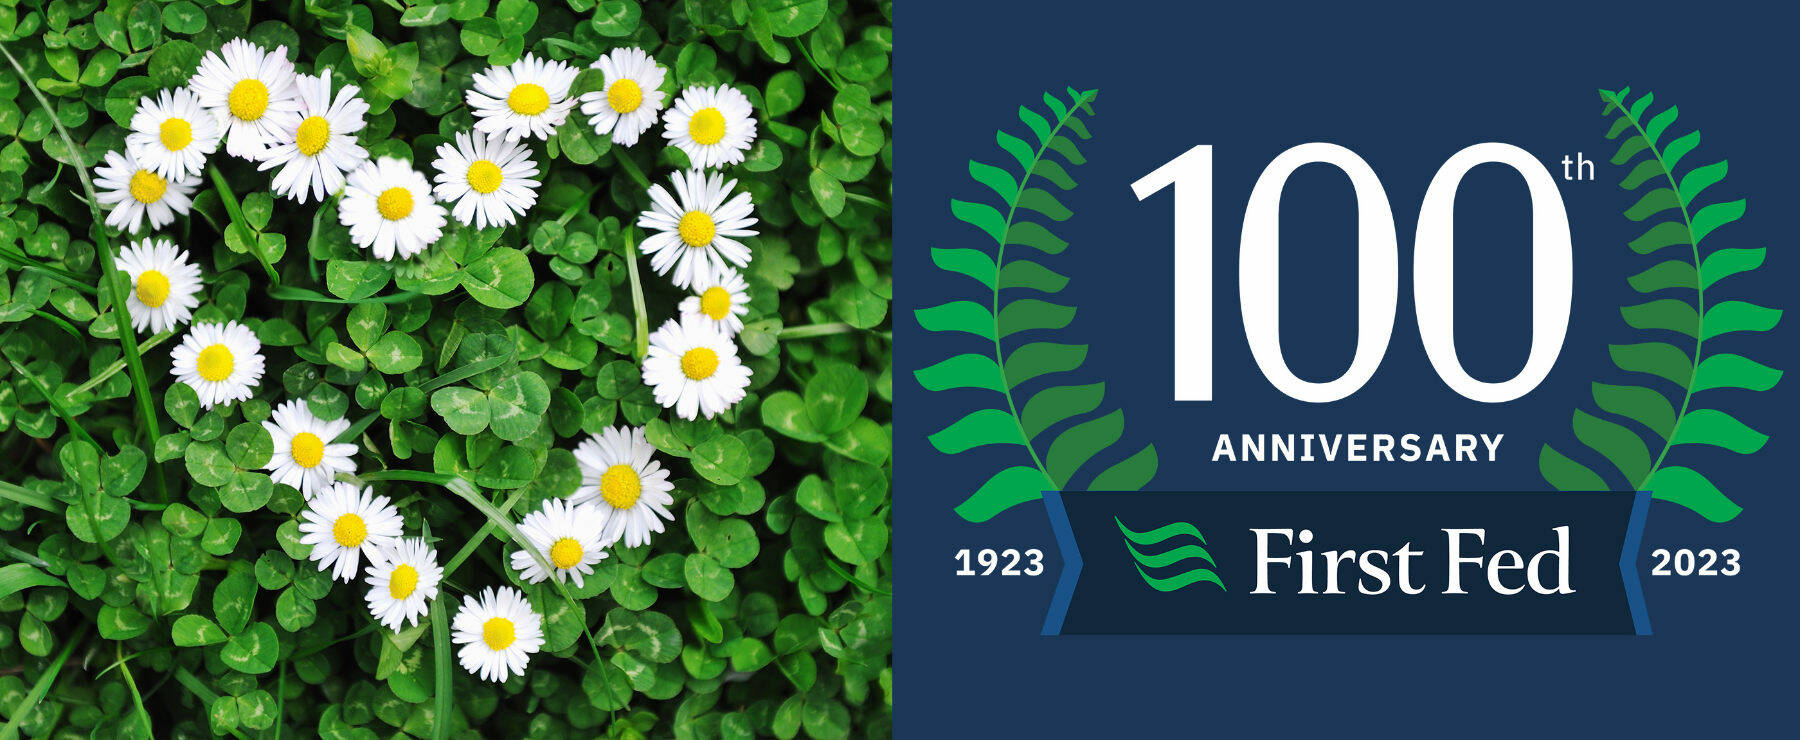 This year’s Customer Appreciation Week falls on First Fed’s 100th anniversary.